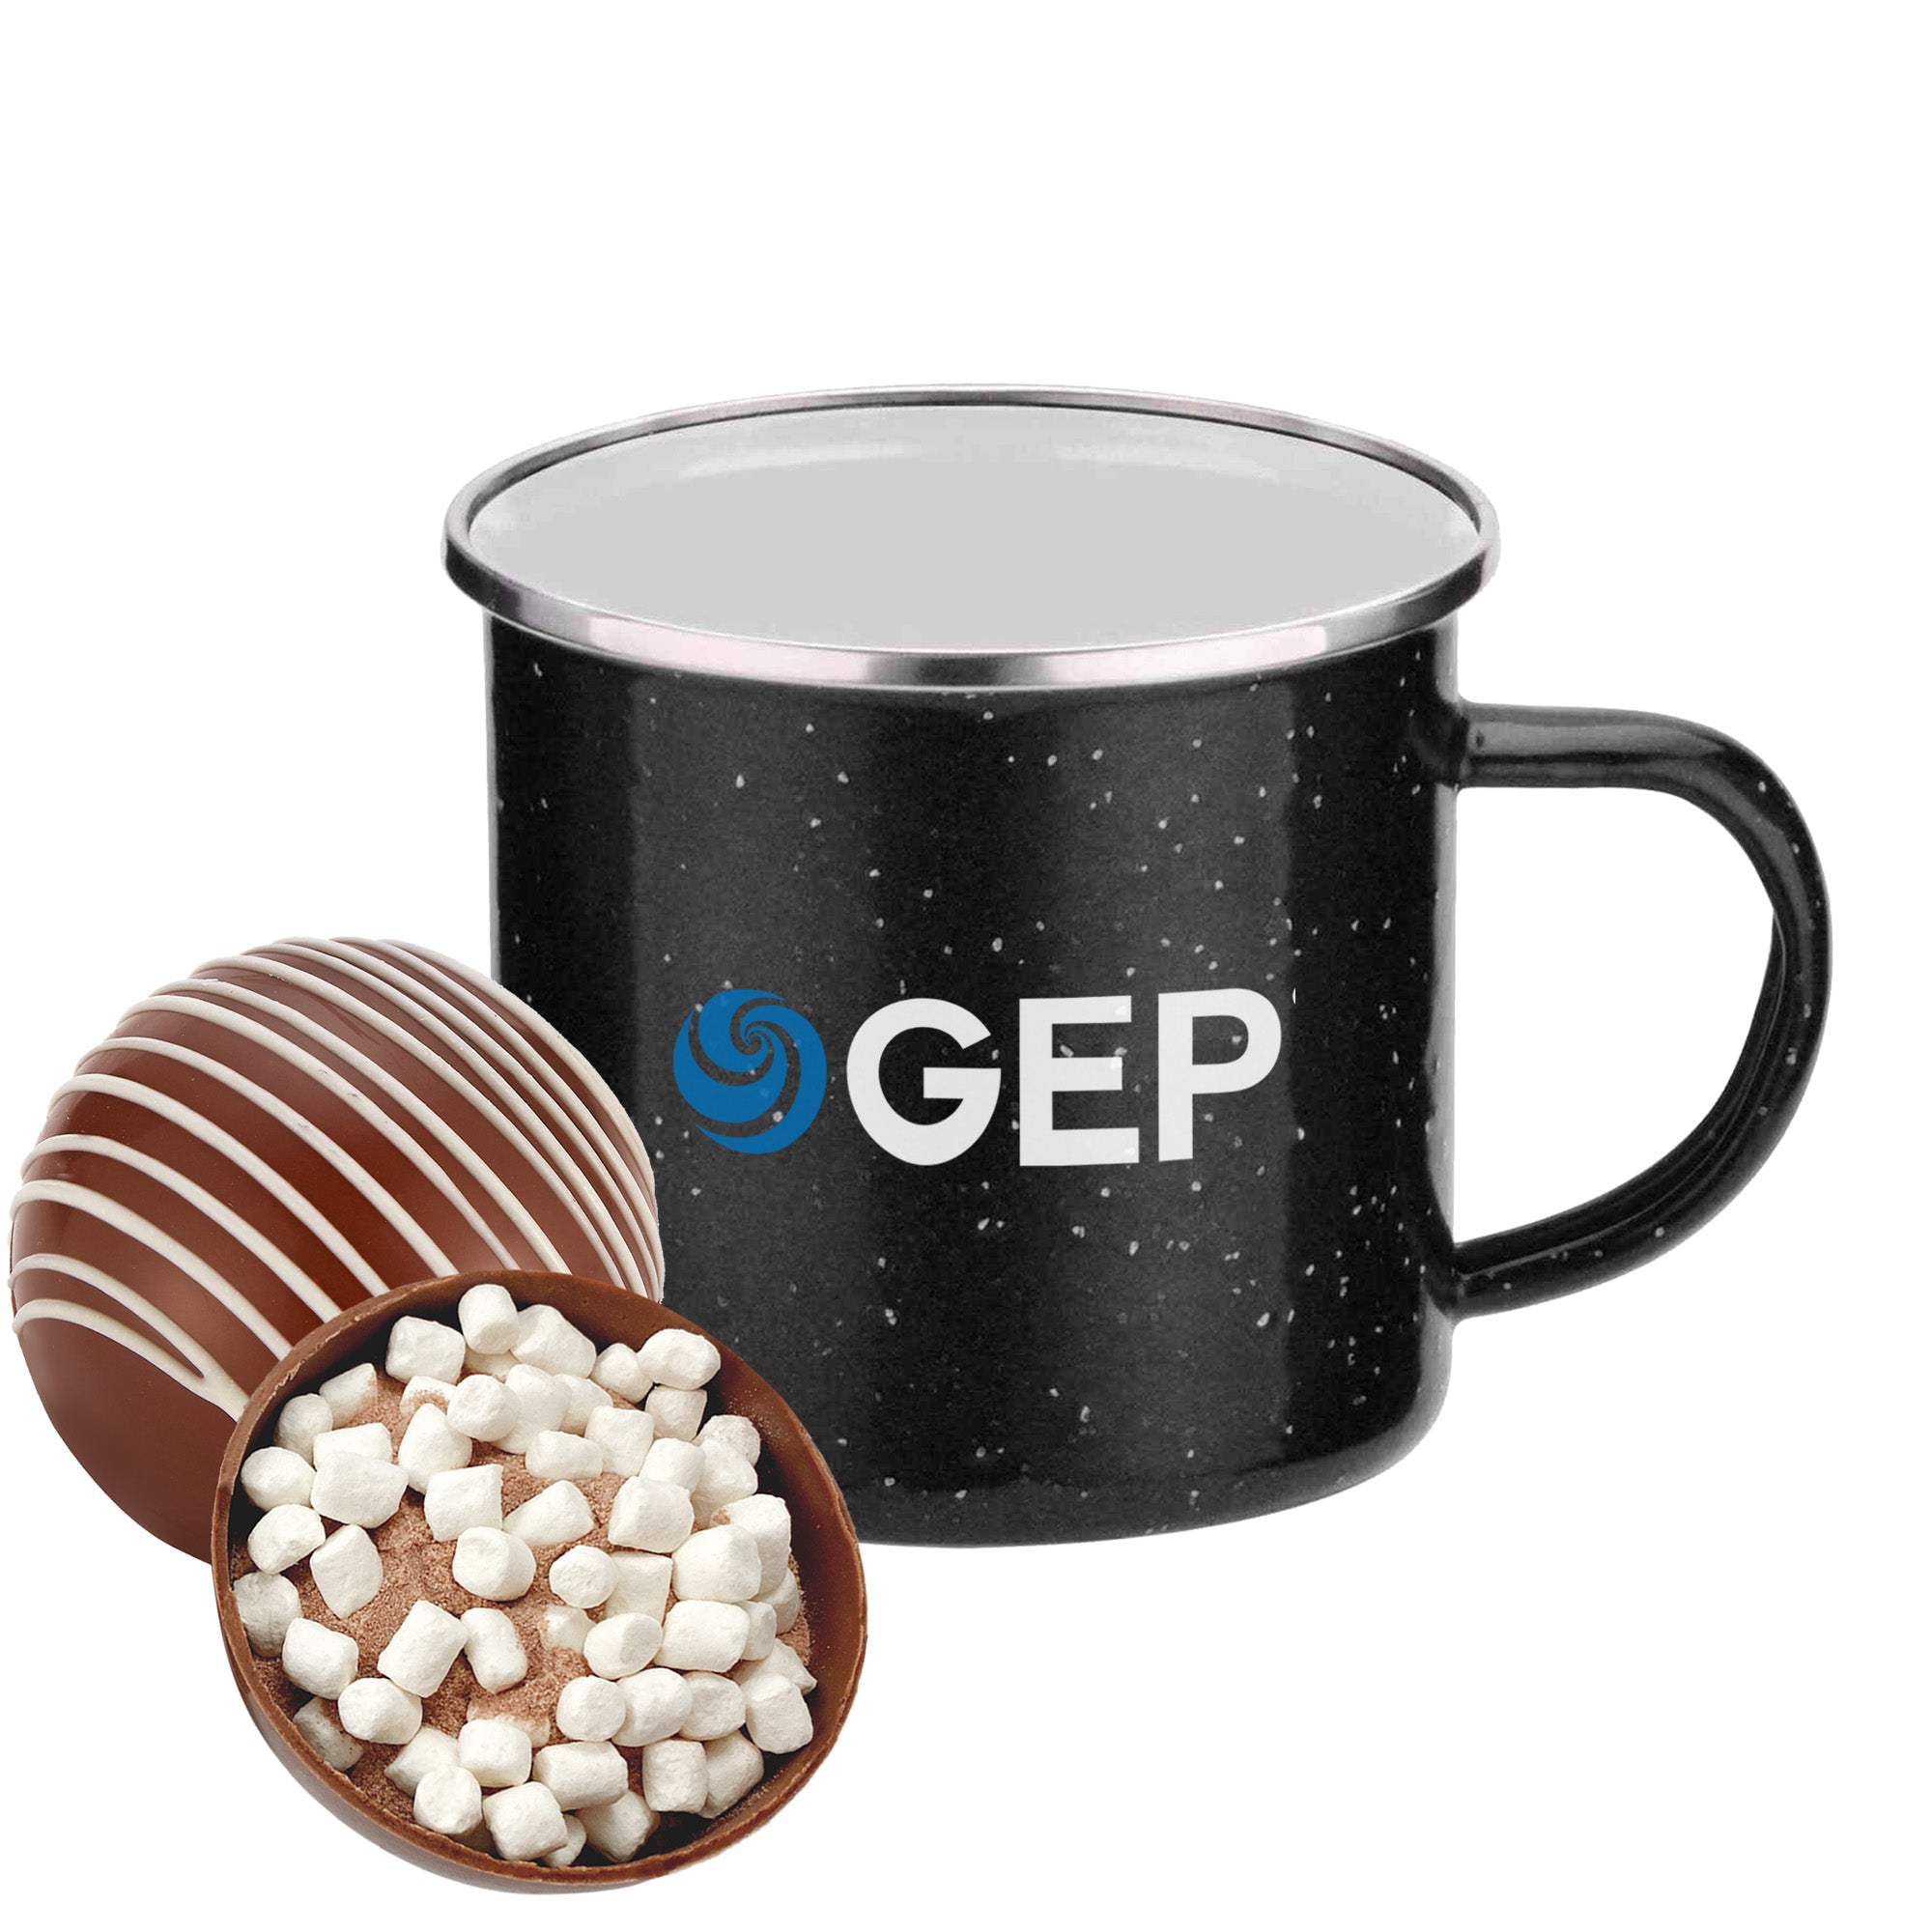 Speckled Camping Mug - 16 oz., Valentine's Day Cocoa & Smores Gift